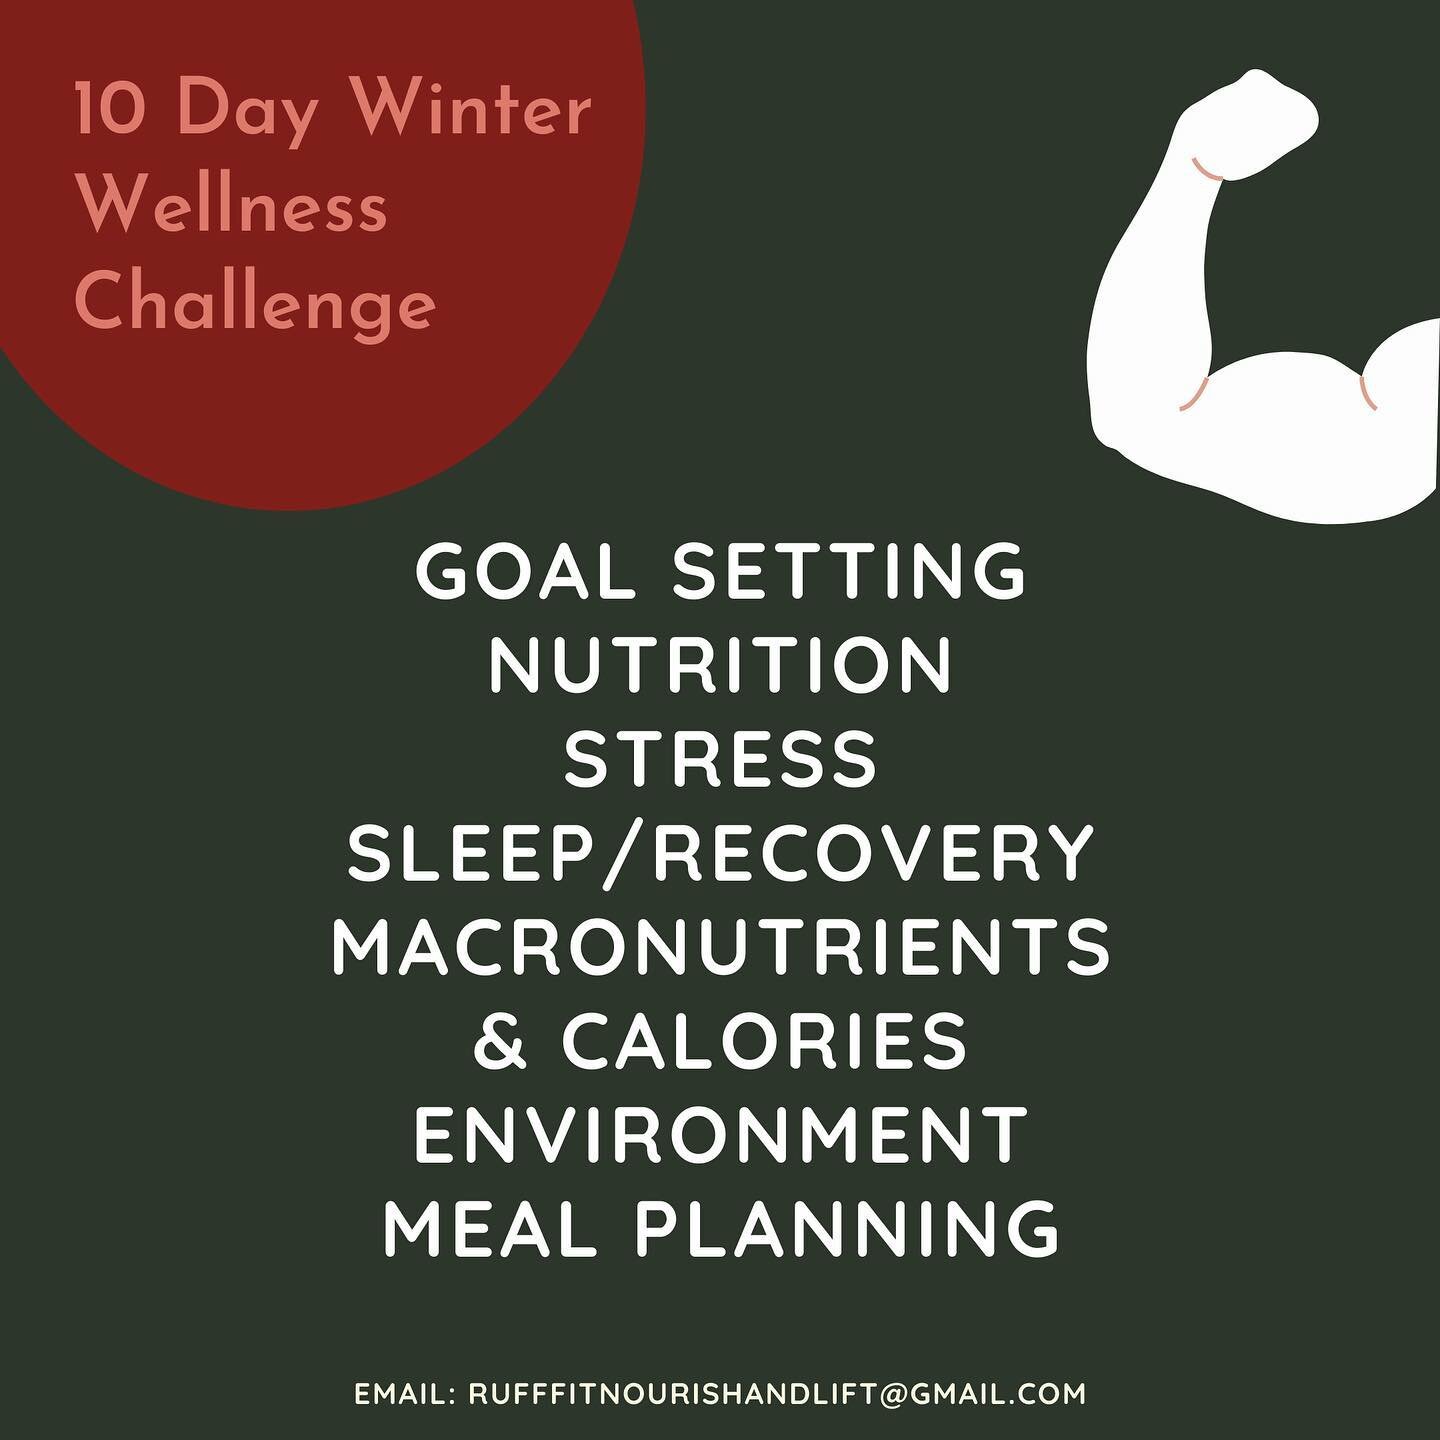 You don't want to miss the 2020 Winter Wellness Challenge hosted by Mary Teunis. Over 10 days we will dive into goal setting, nutrition education, stress management, sleep hygiene, macronutrients, calories, environmental impact, and meal planning! Th